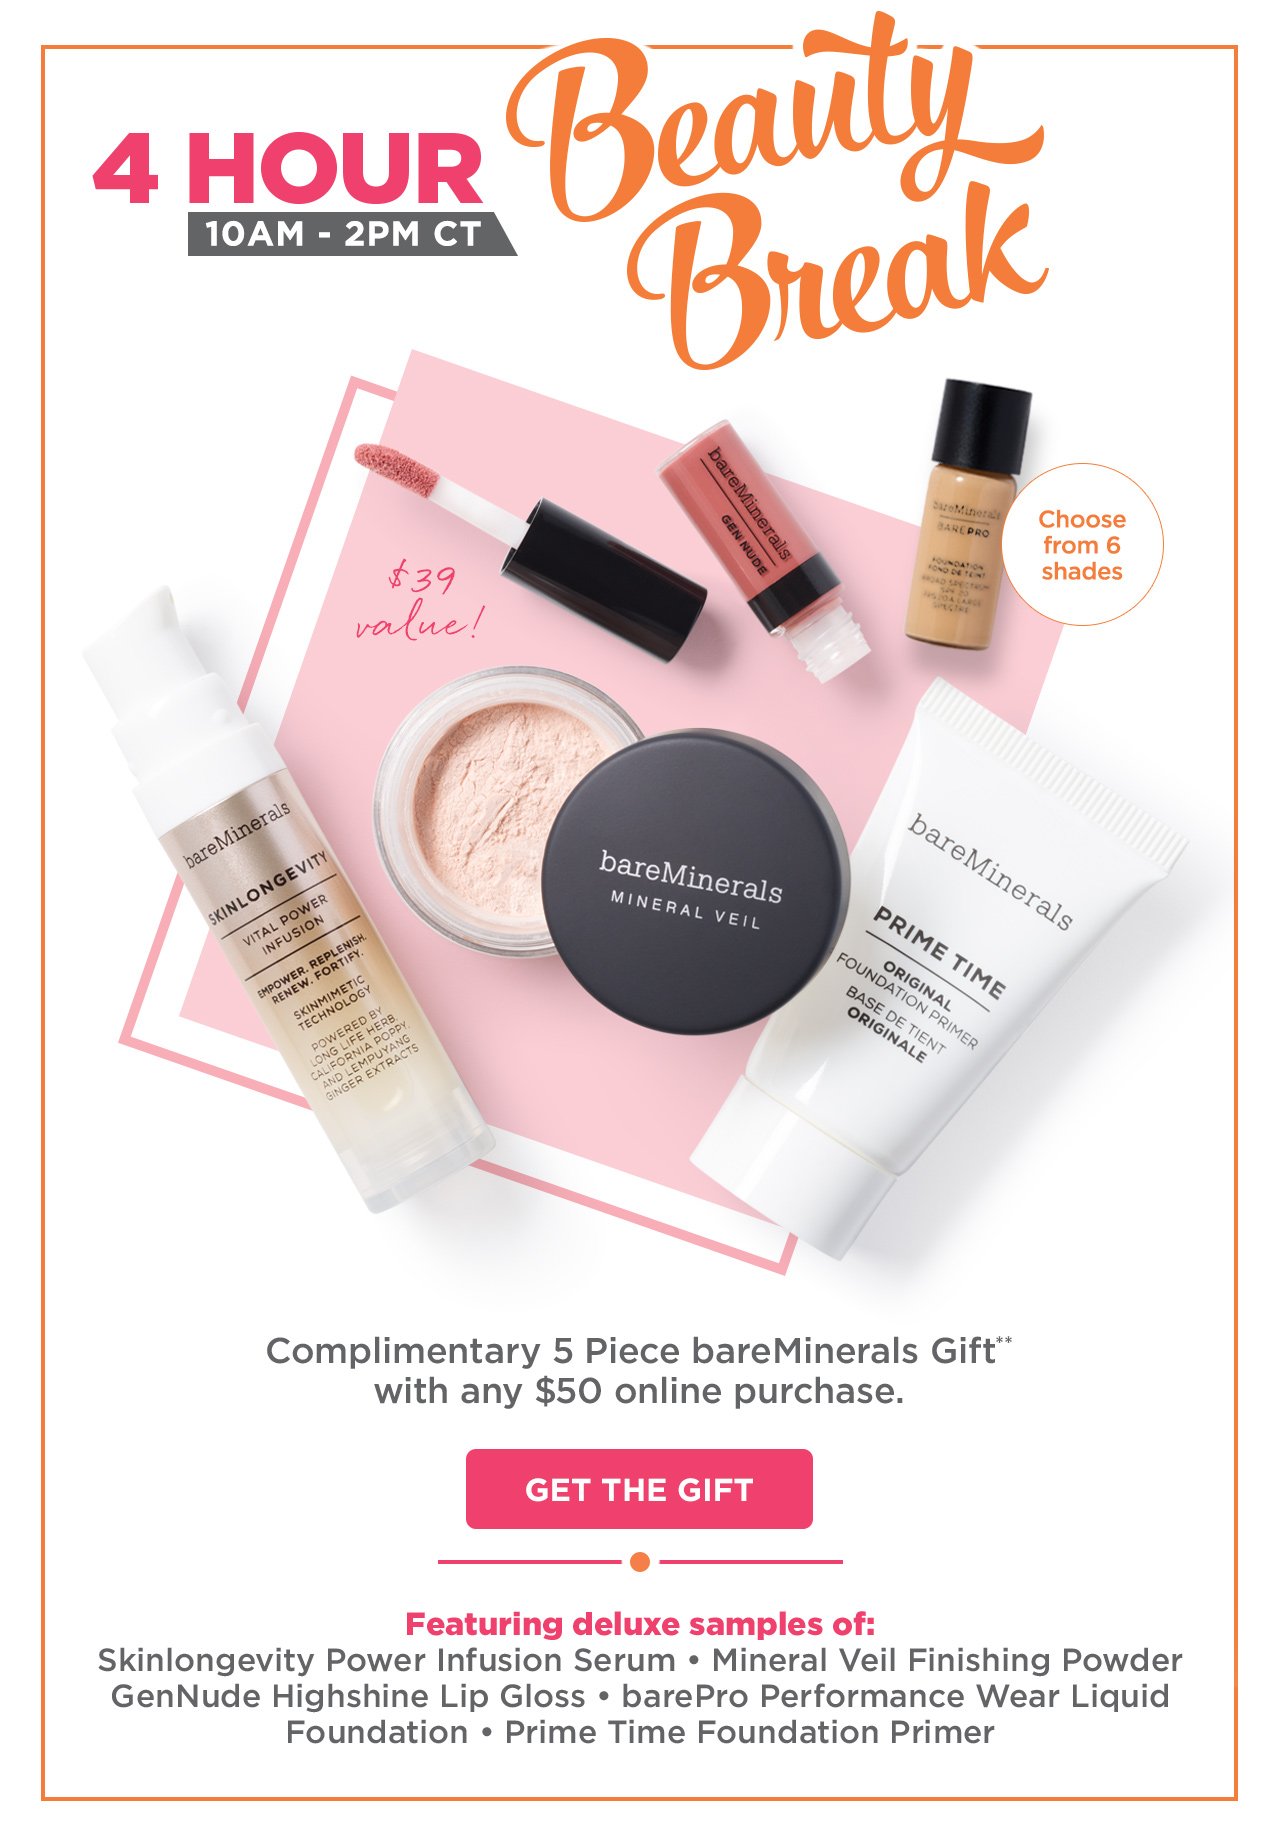 4 Hour Beauty Break! Complimentary 5 Piece bareMinerals gift with any $50 online purchase